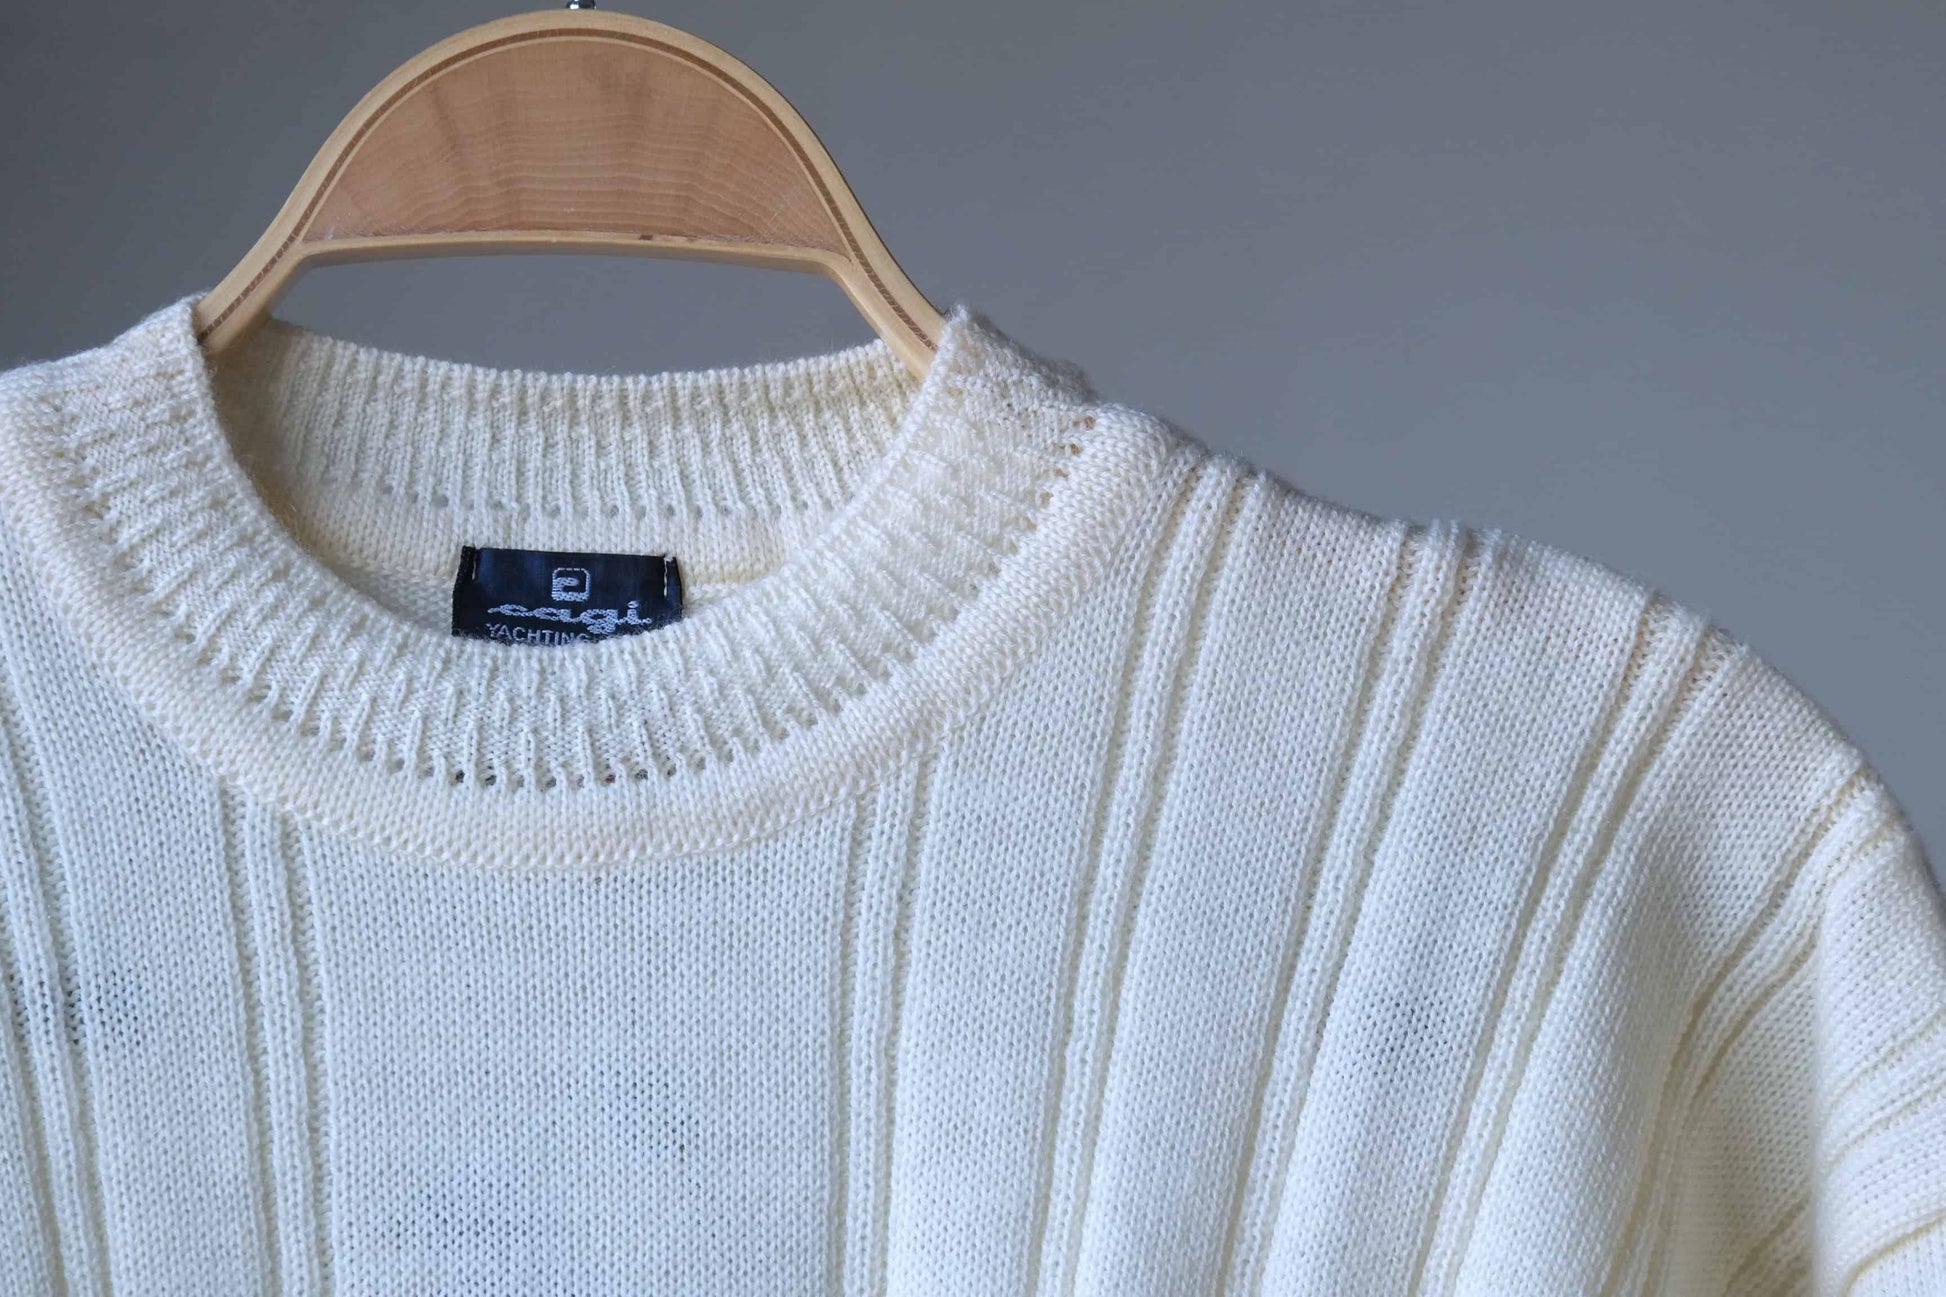 90's Cable Knit Sweater white collar detail